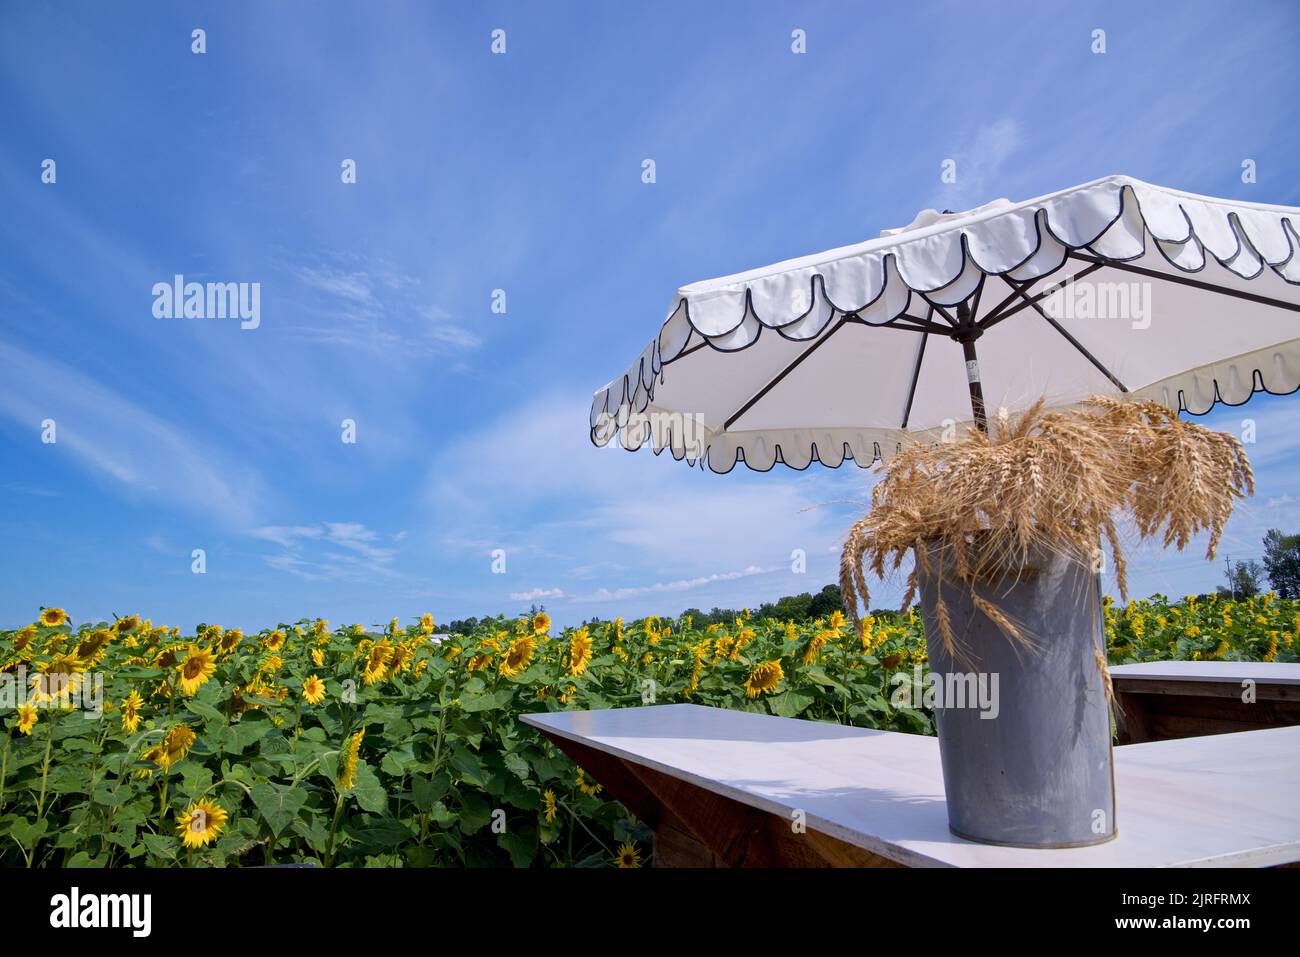 Food and beverage kiosk with an umbrella in the Sunflower Farm Stock Photo